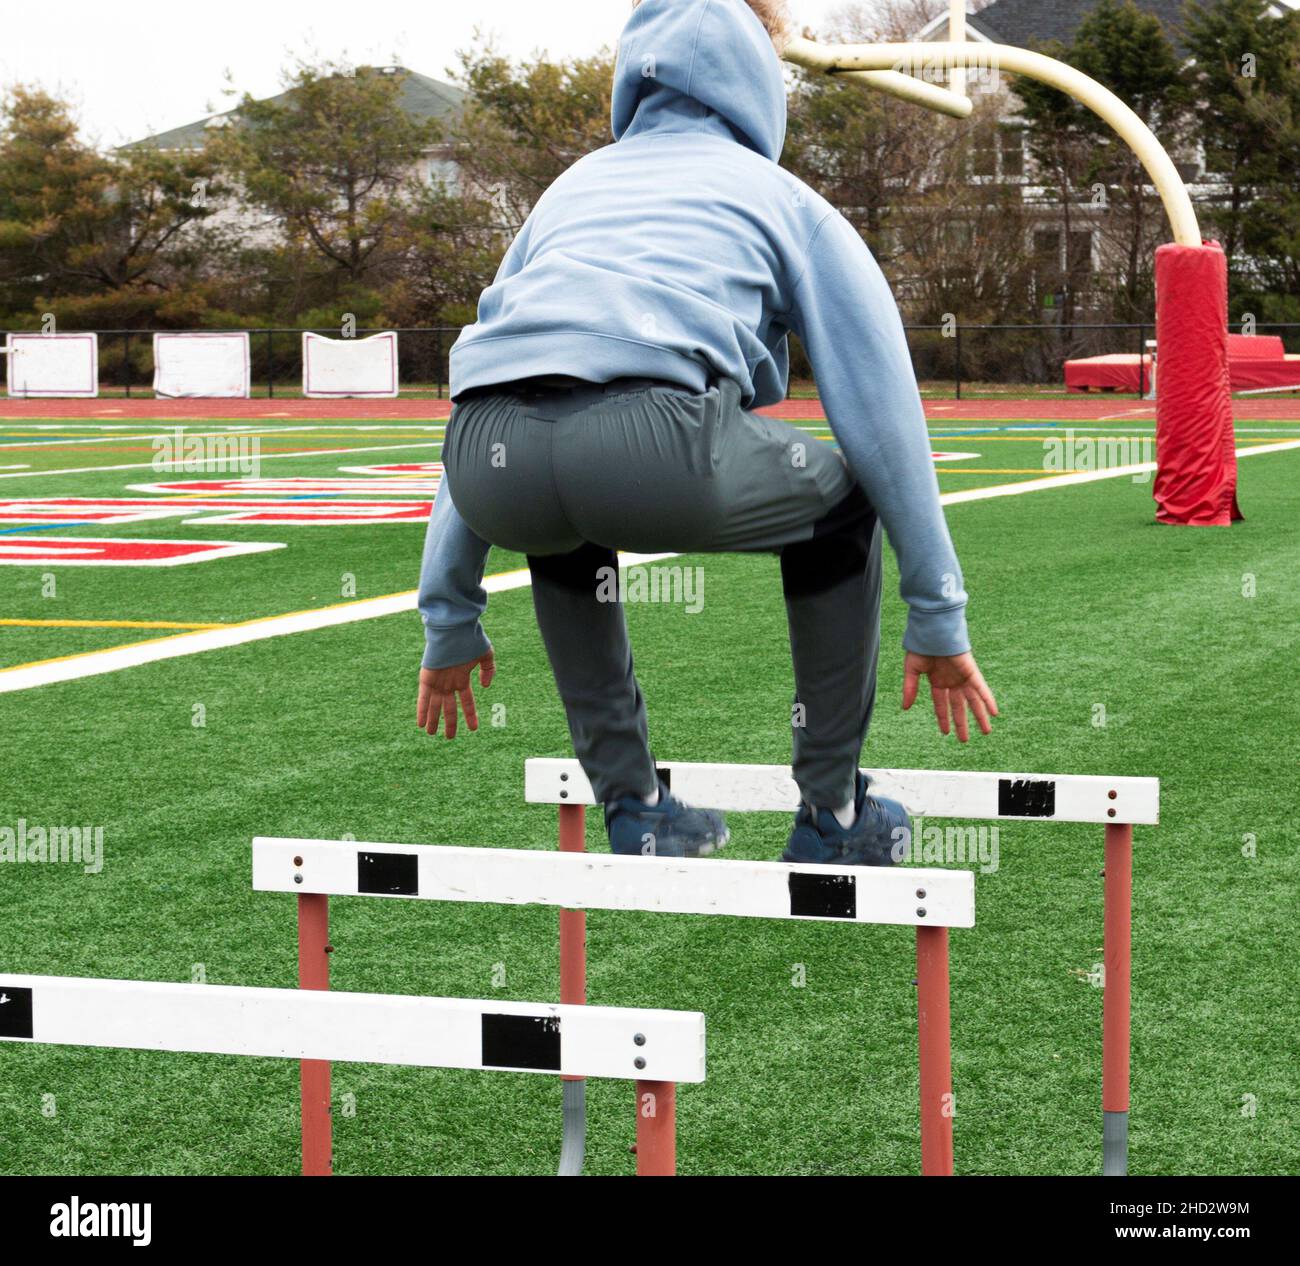 Rear view of a high school boy wearing a blue hoodie jumping over track hurdles on a green turf field during track practice. Stock Photo